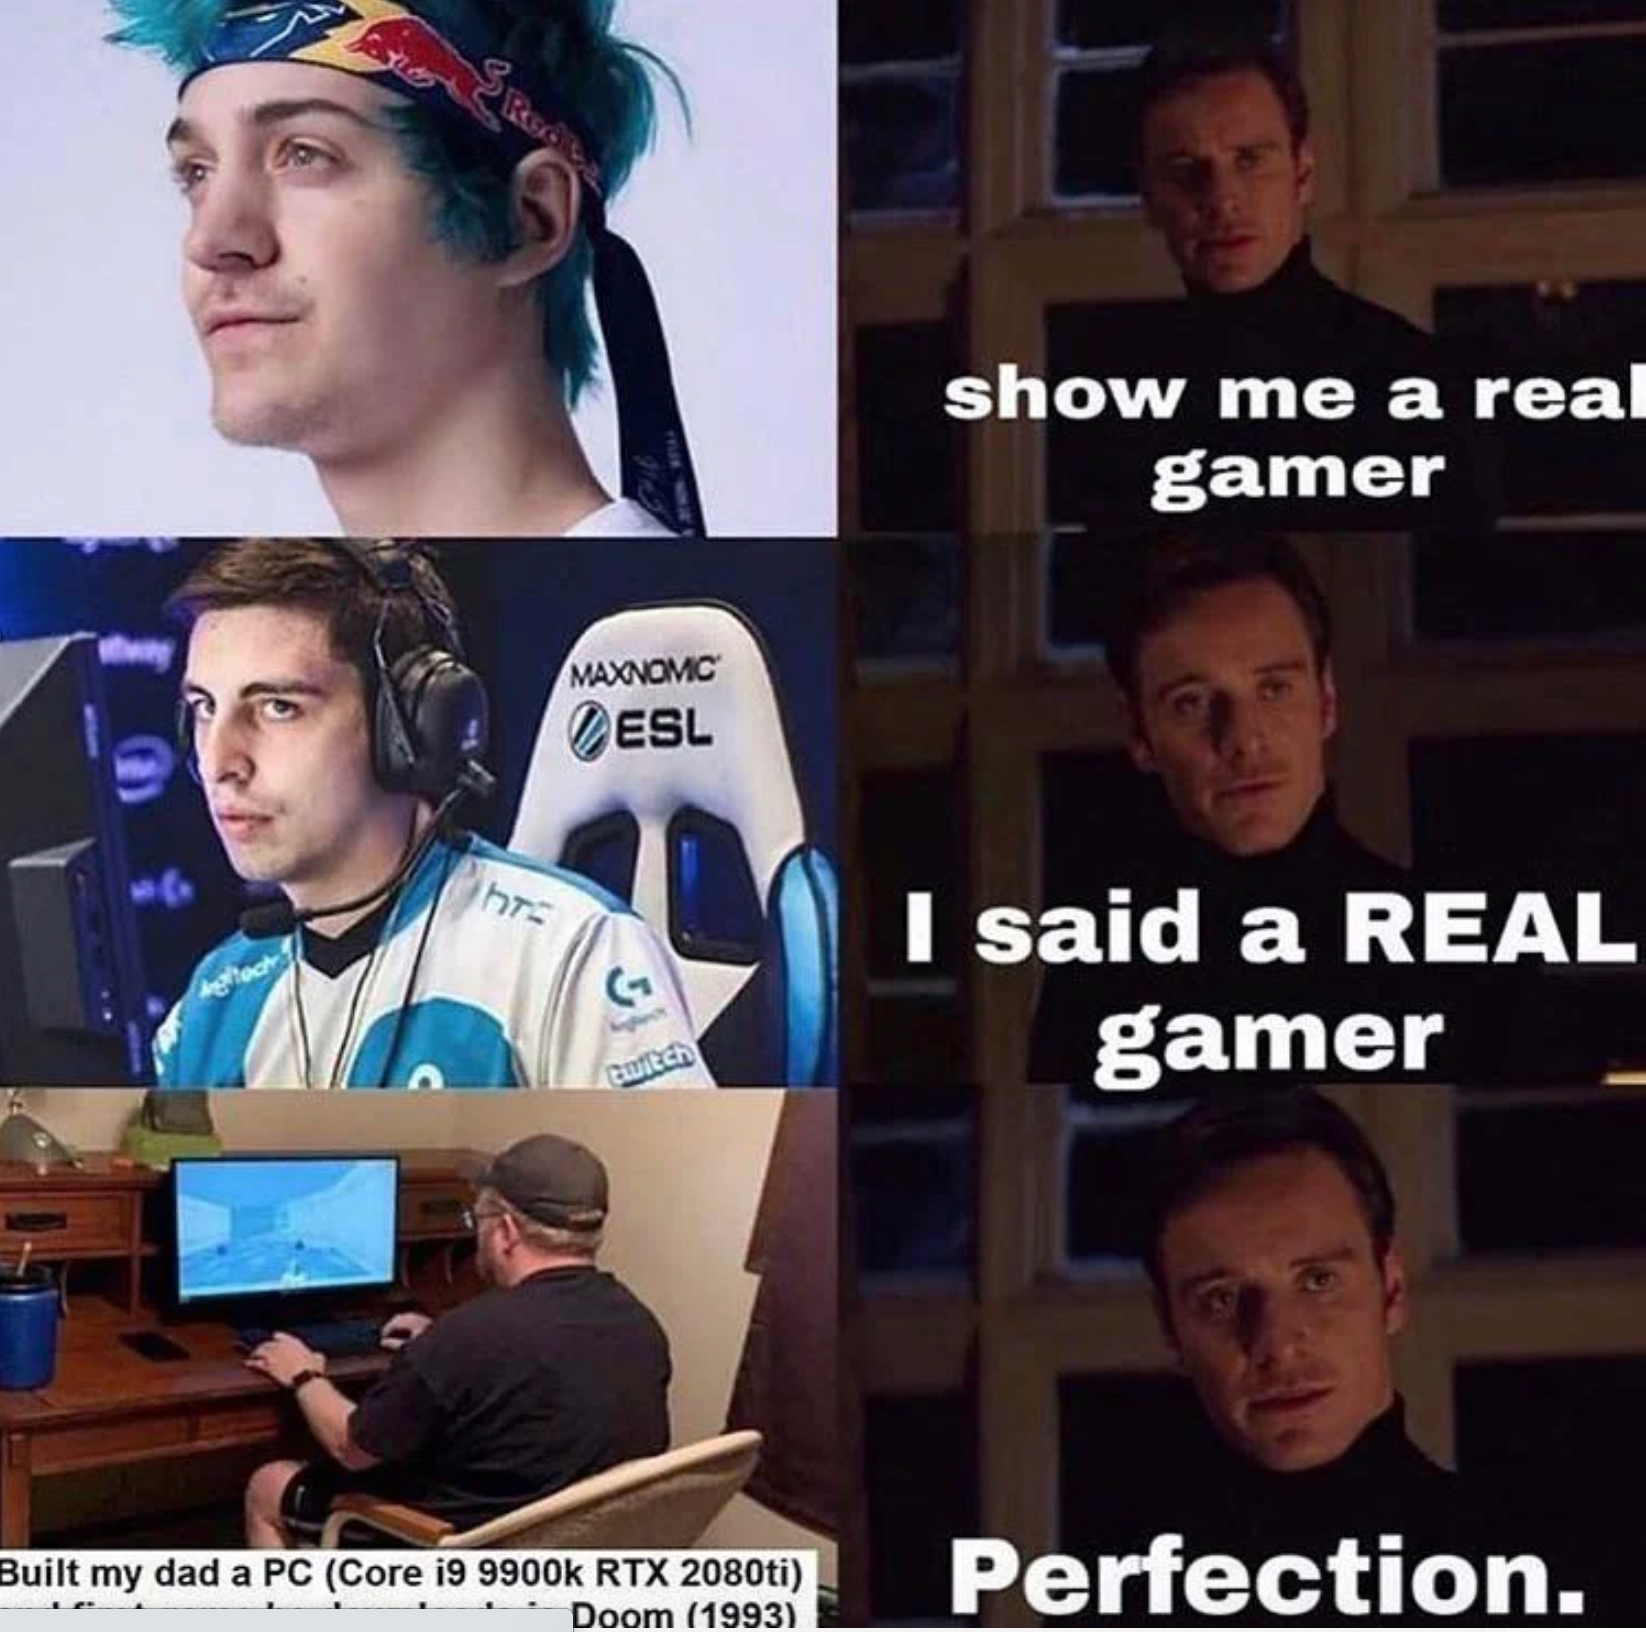 show me a real gamer - show me a real gamer Maxnomc Esl hr I said a Real gamer Built my dad a Pc Core i Rtx 2080ti Doom 1993 Perfection.